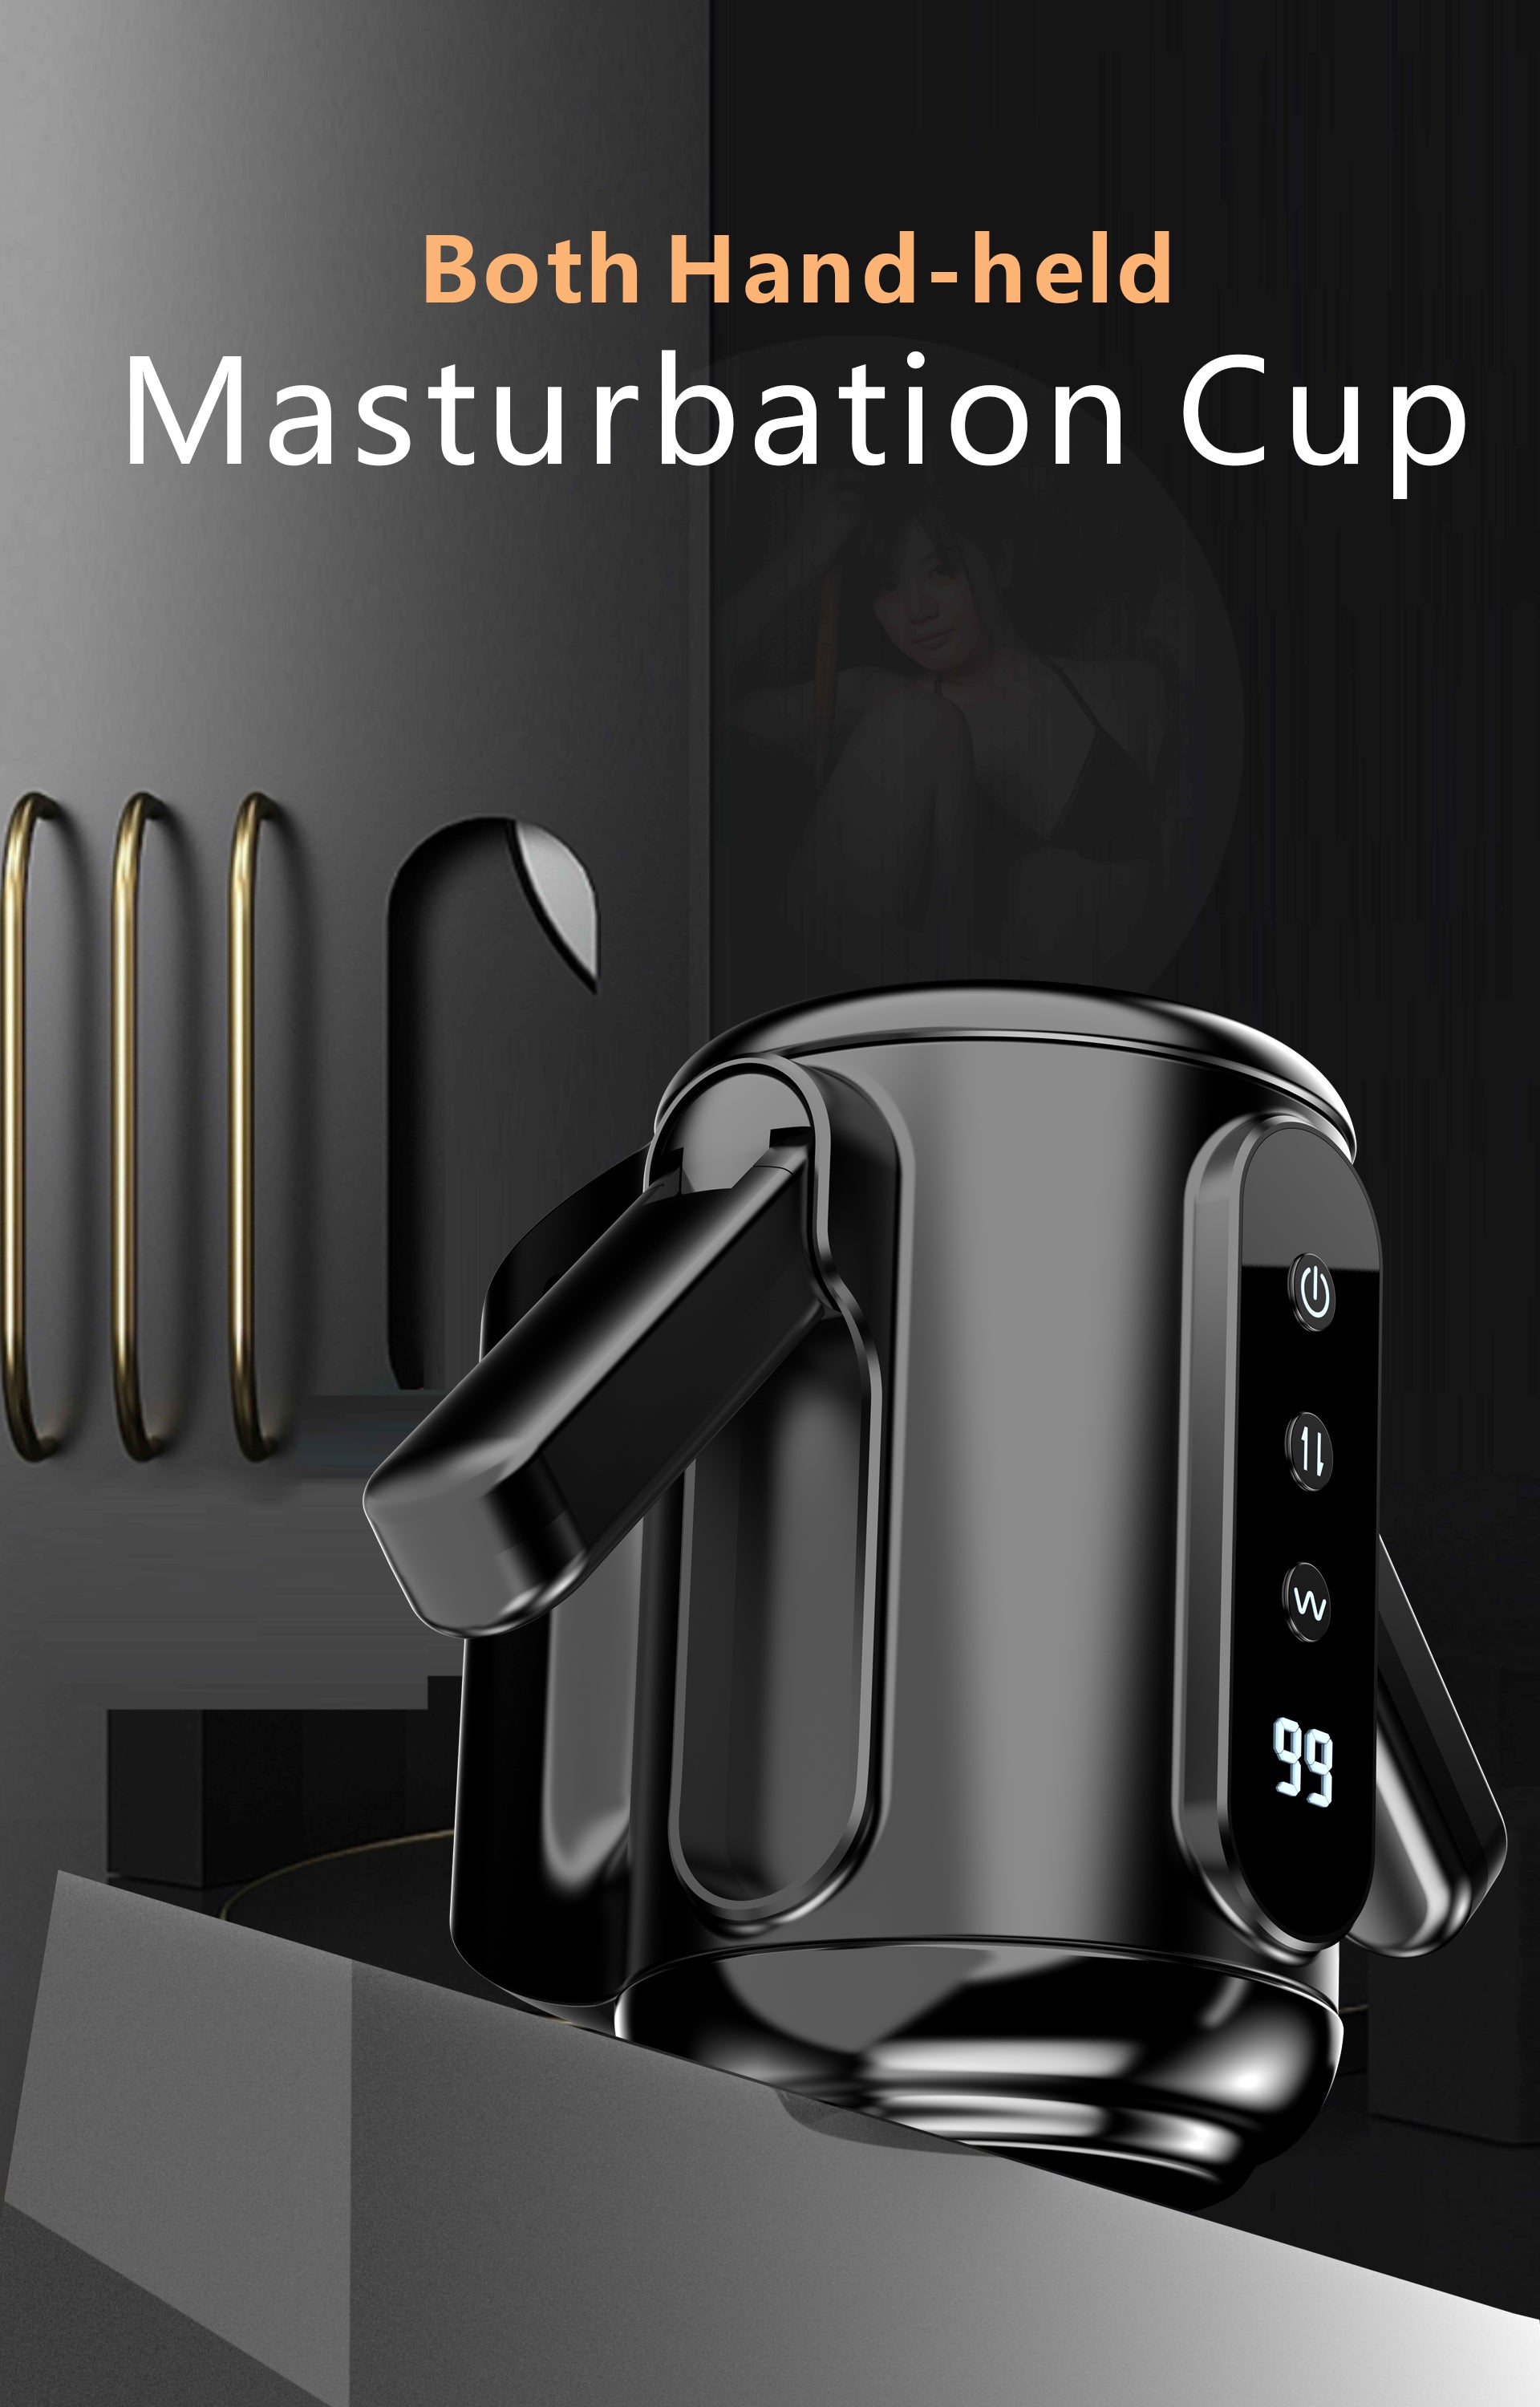 Both Hand-Held Masturbation Cup Tremor Frequency sucking vibration1